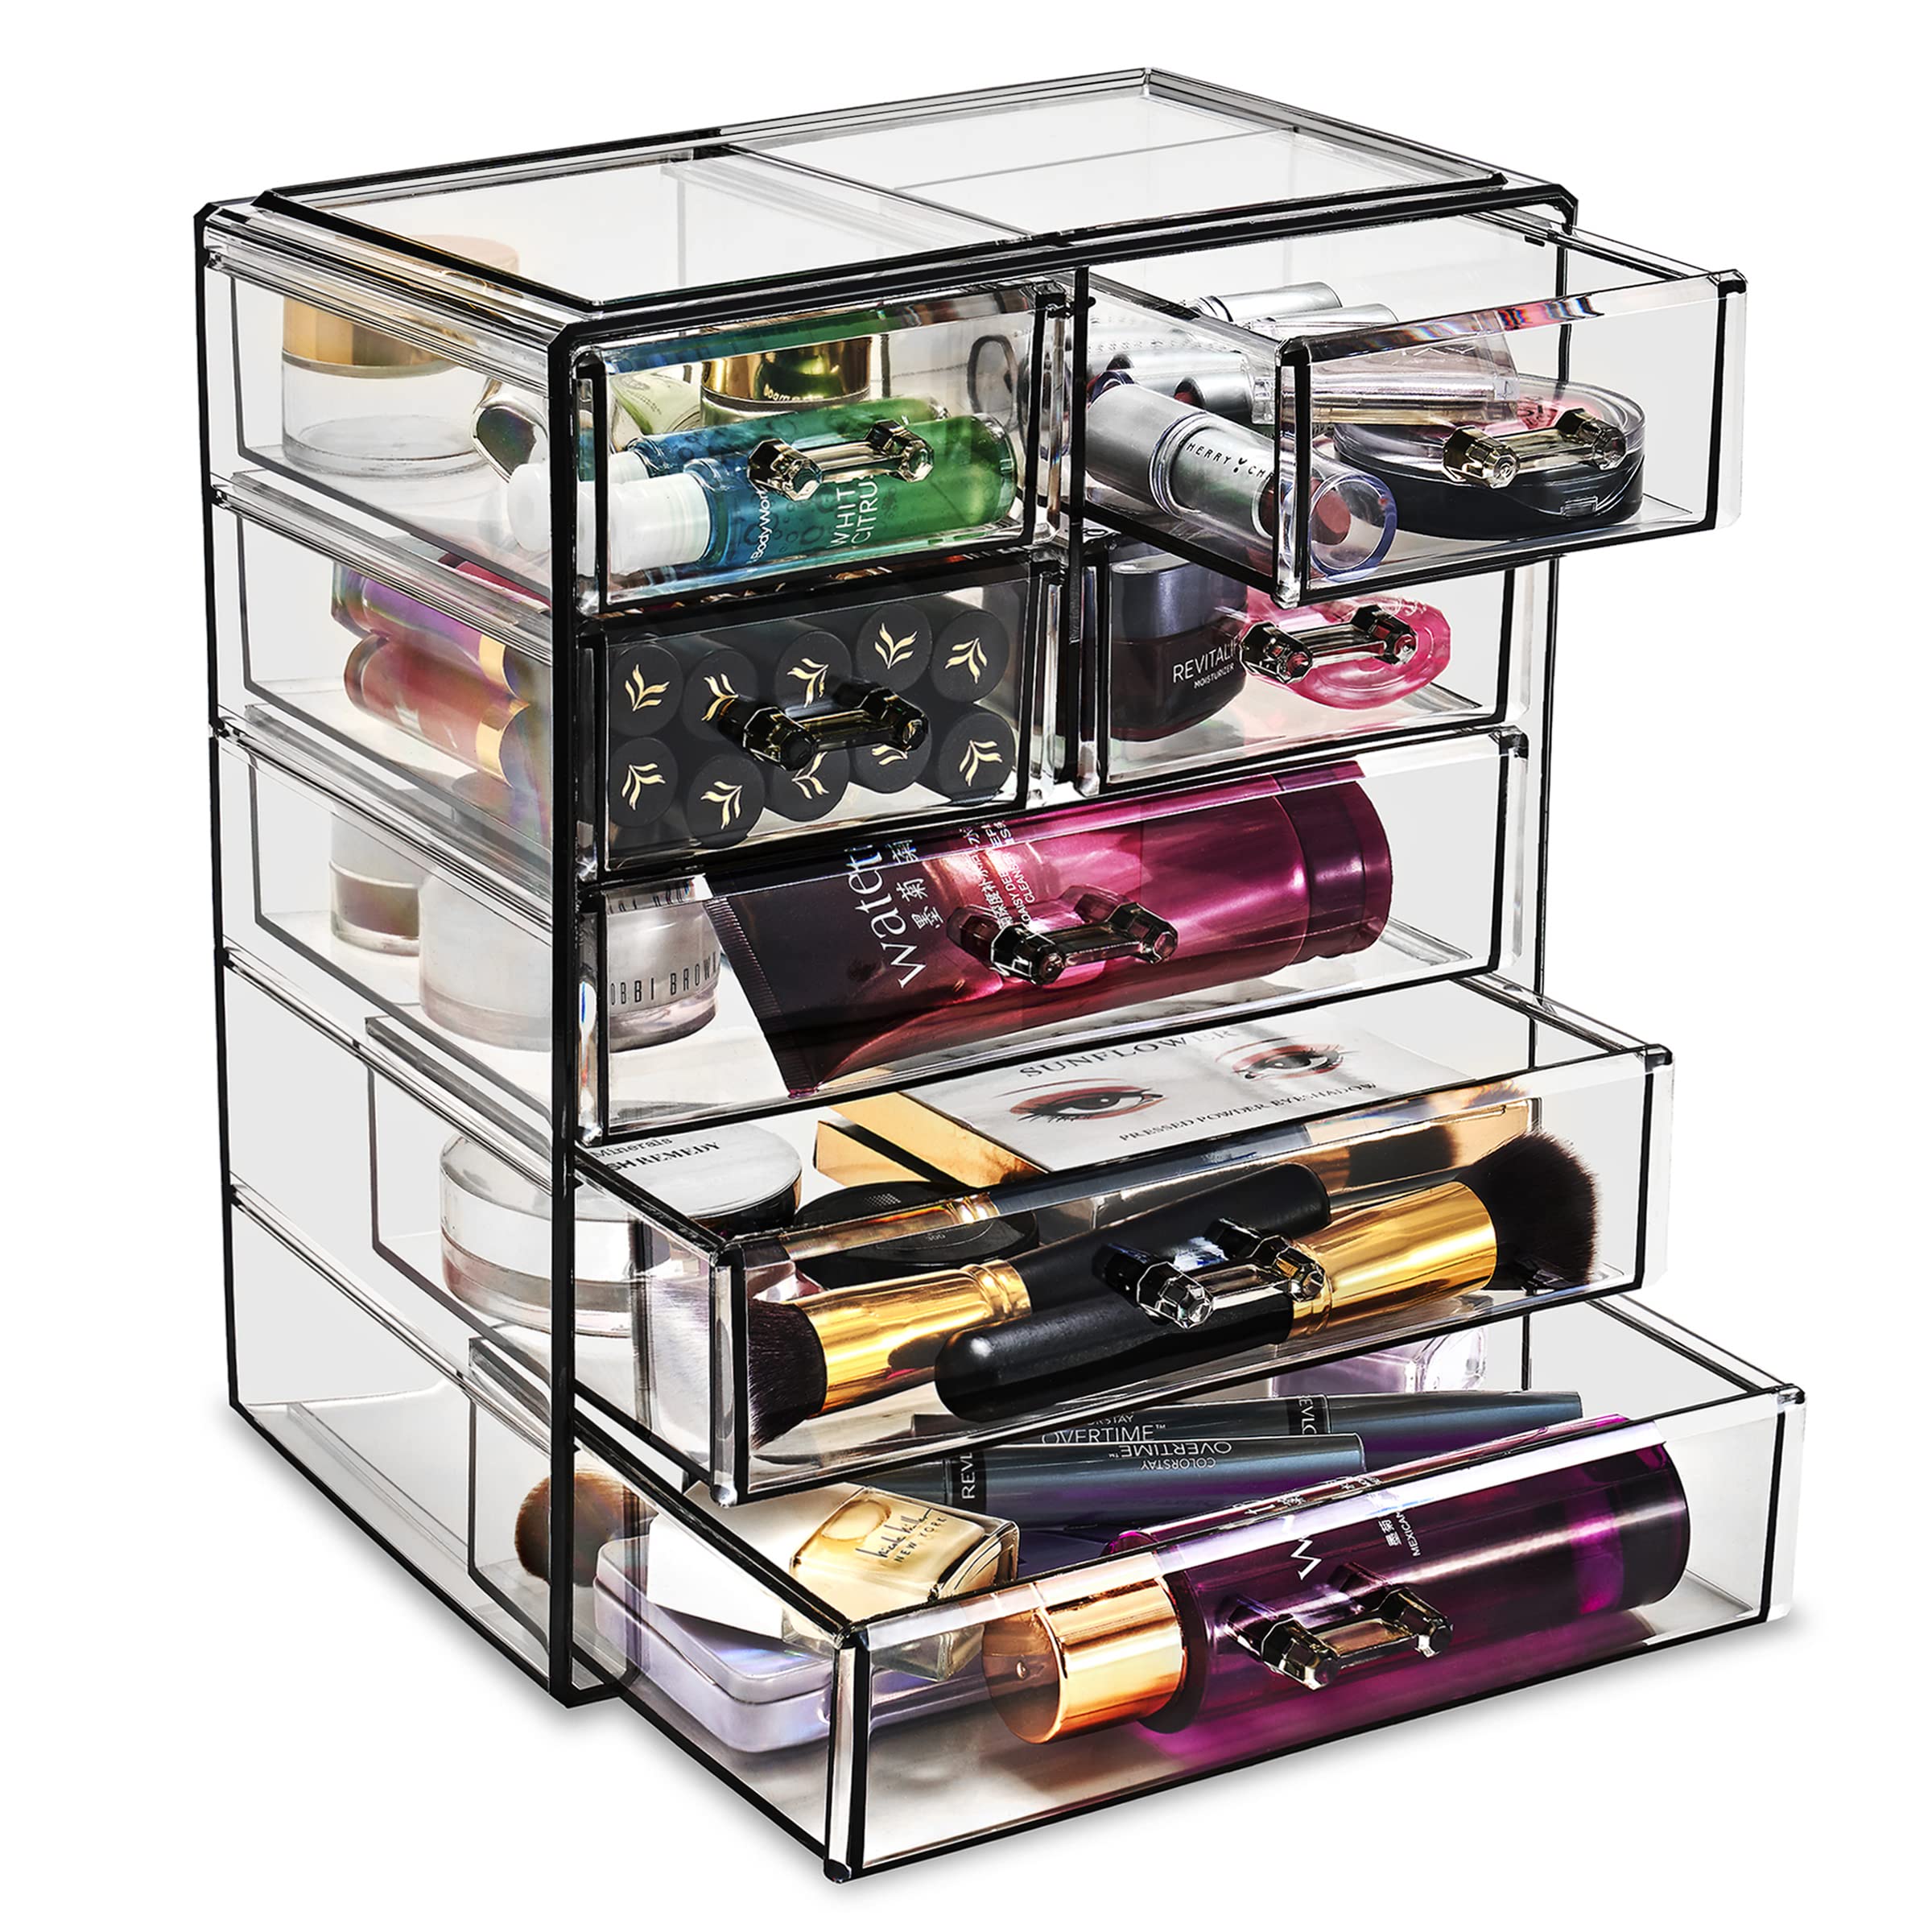 Sorbus Acrylic Makeup Organizer - Organization and Storage Case for Cosmetics Make Up & Jewelry - Big Clear Makeup Organizer for Vanity, Bathroom, College Dorm, Closet, Desk (3 Large, 4 Small Drawers)